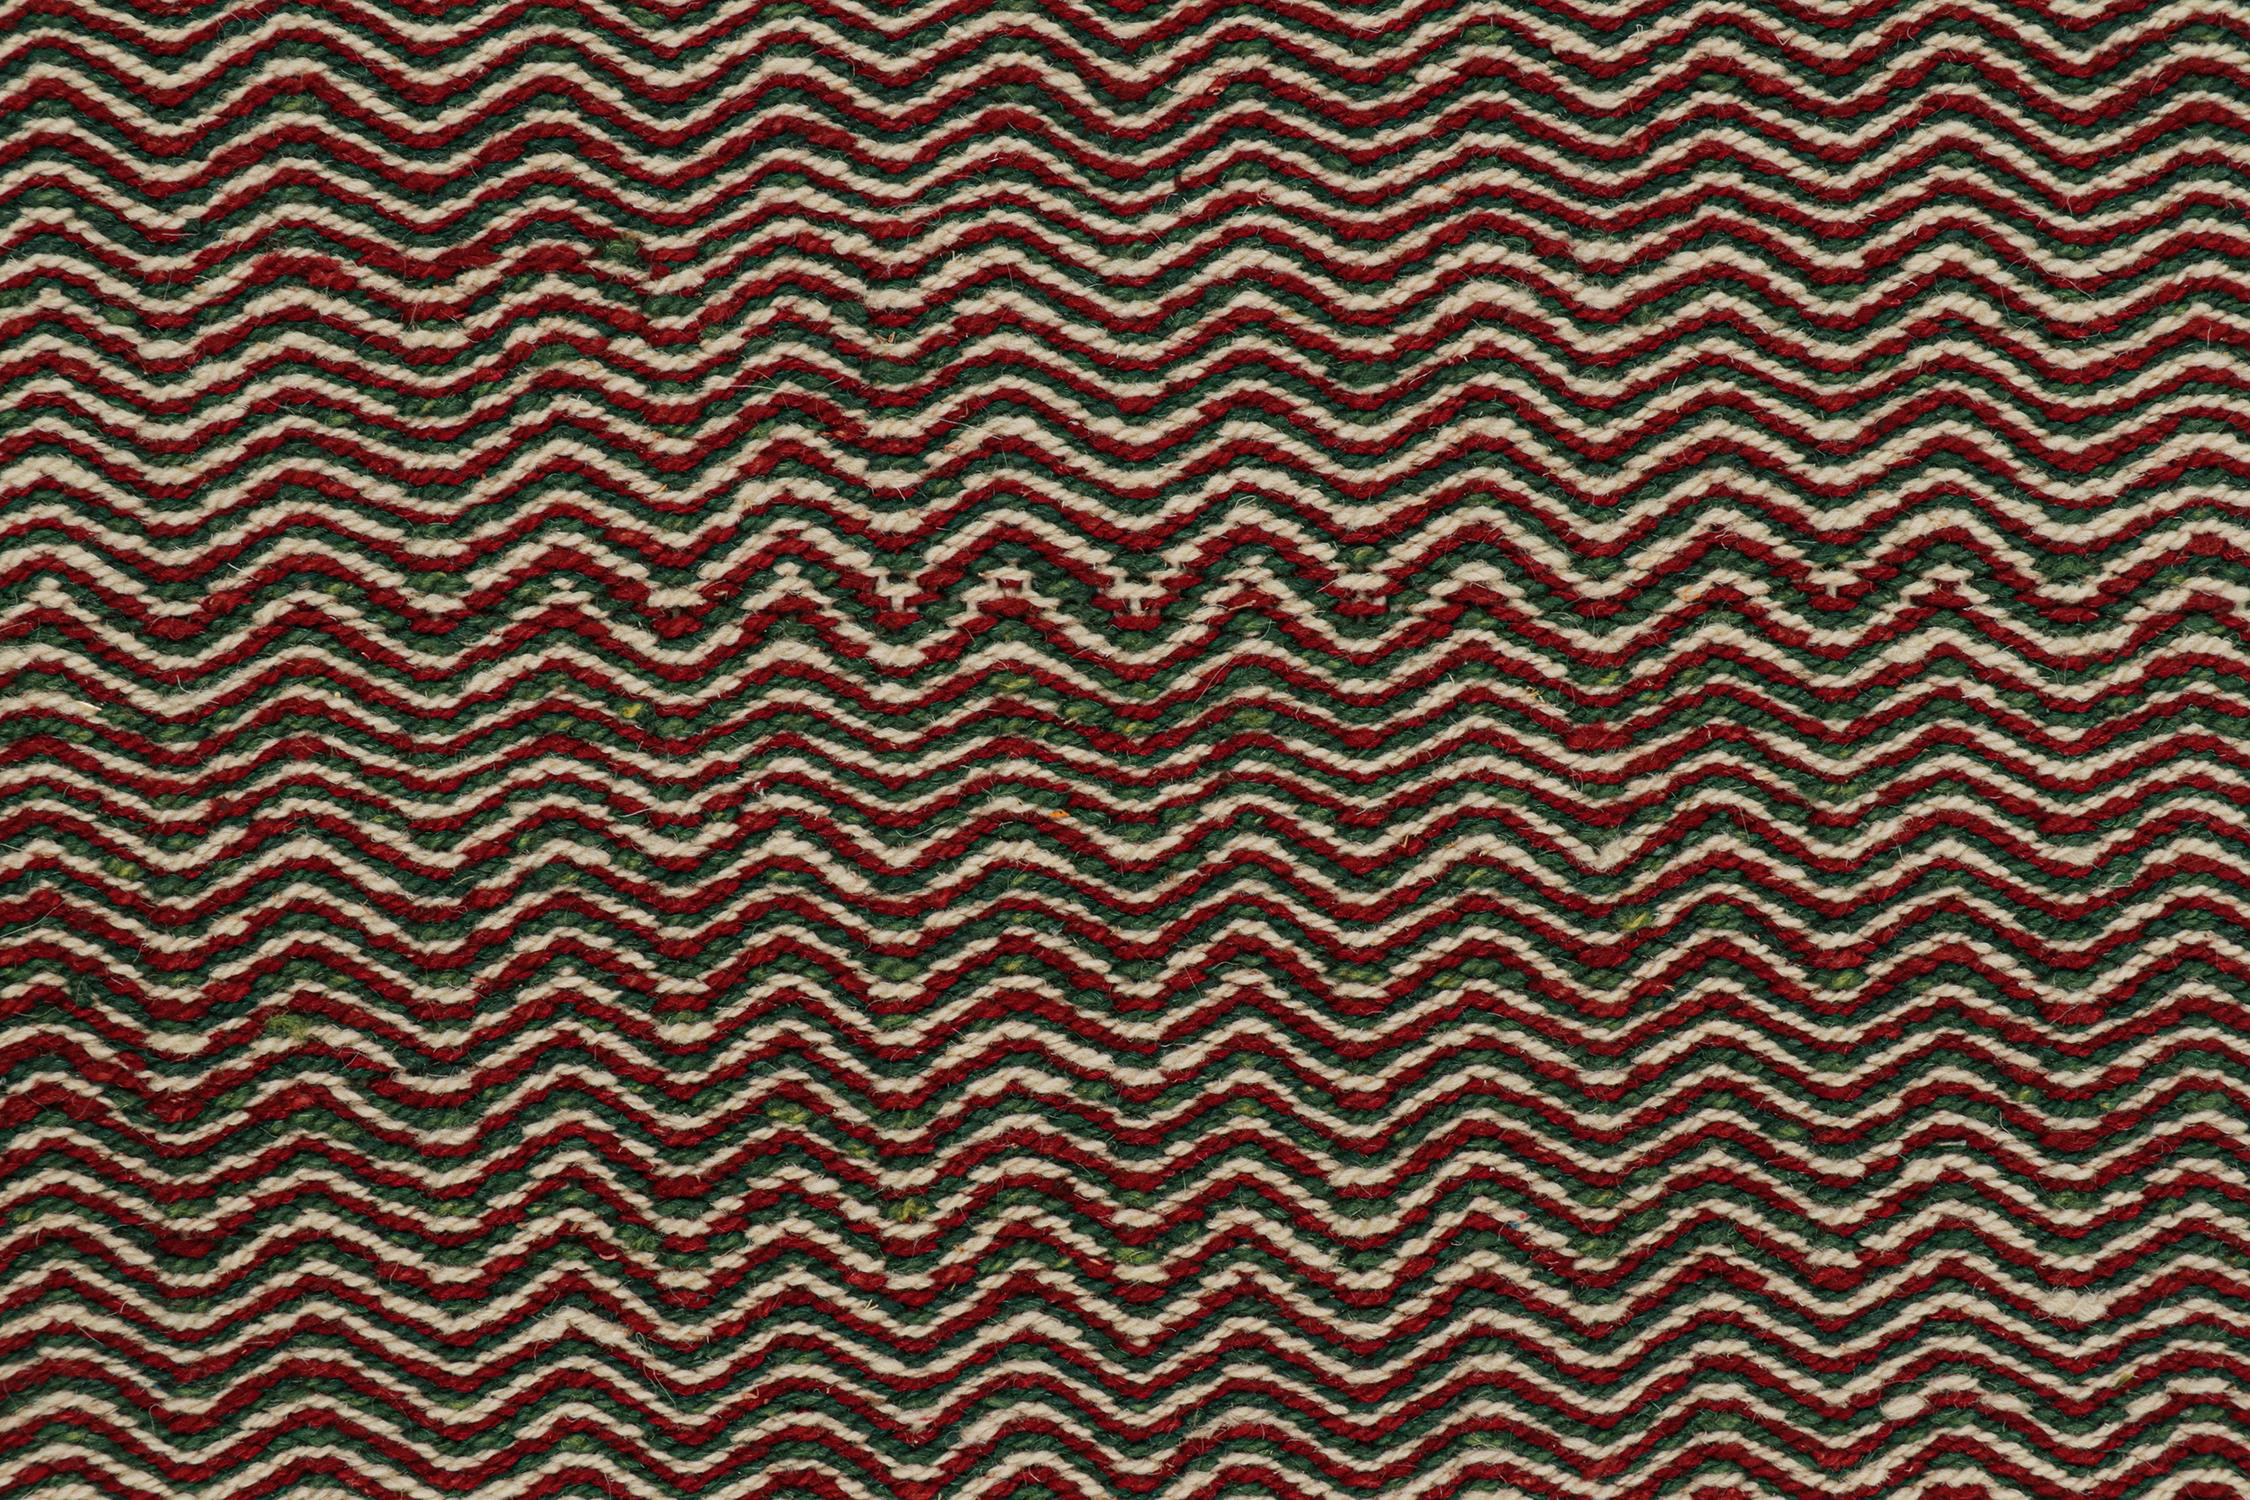 Rug & Kilim’s Contemporary Kilim Rug in Red, Green, and White Chevrons In New Condition For Sale In Long Island City, NY